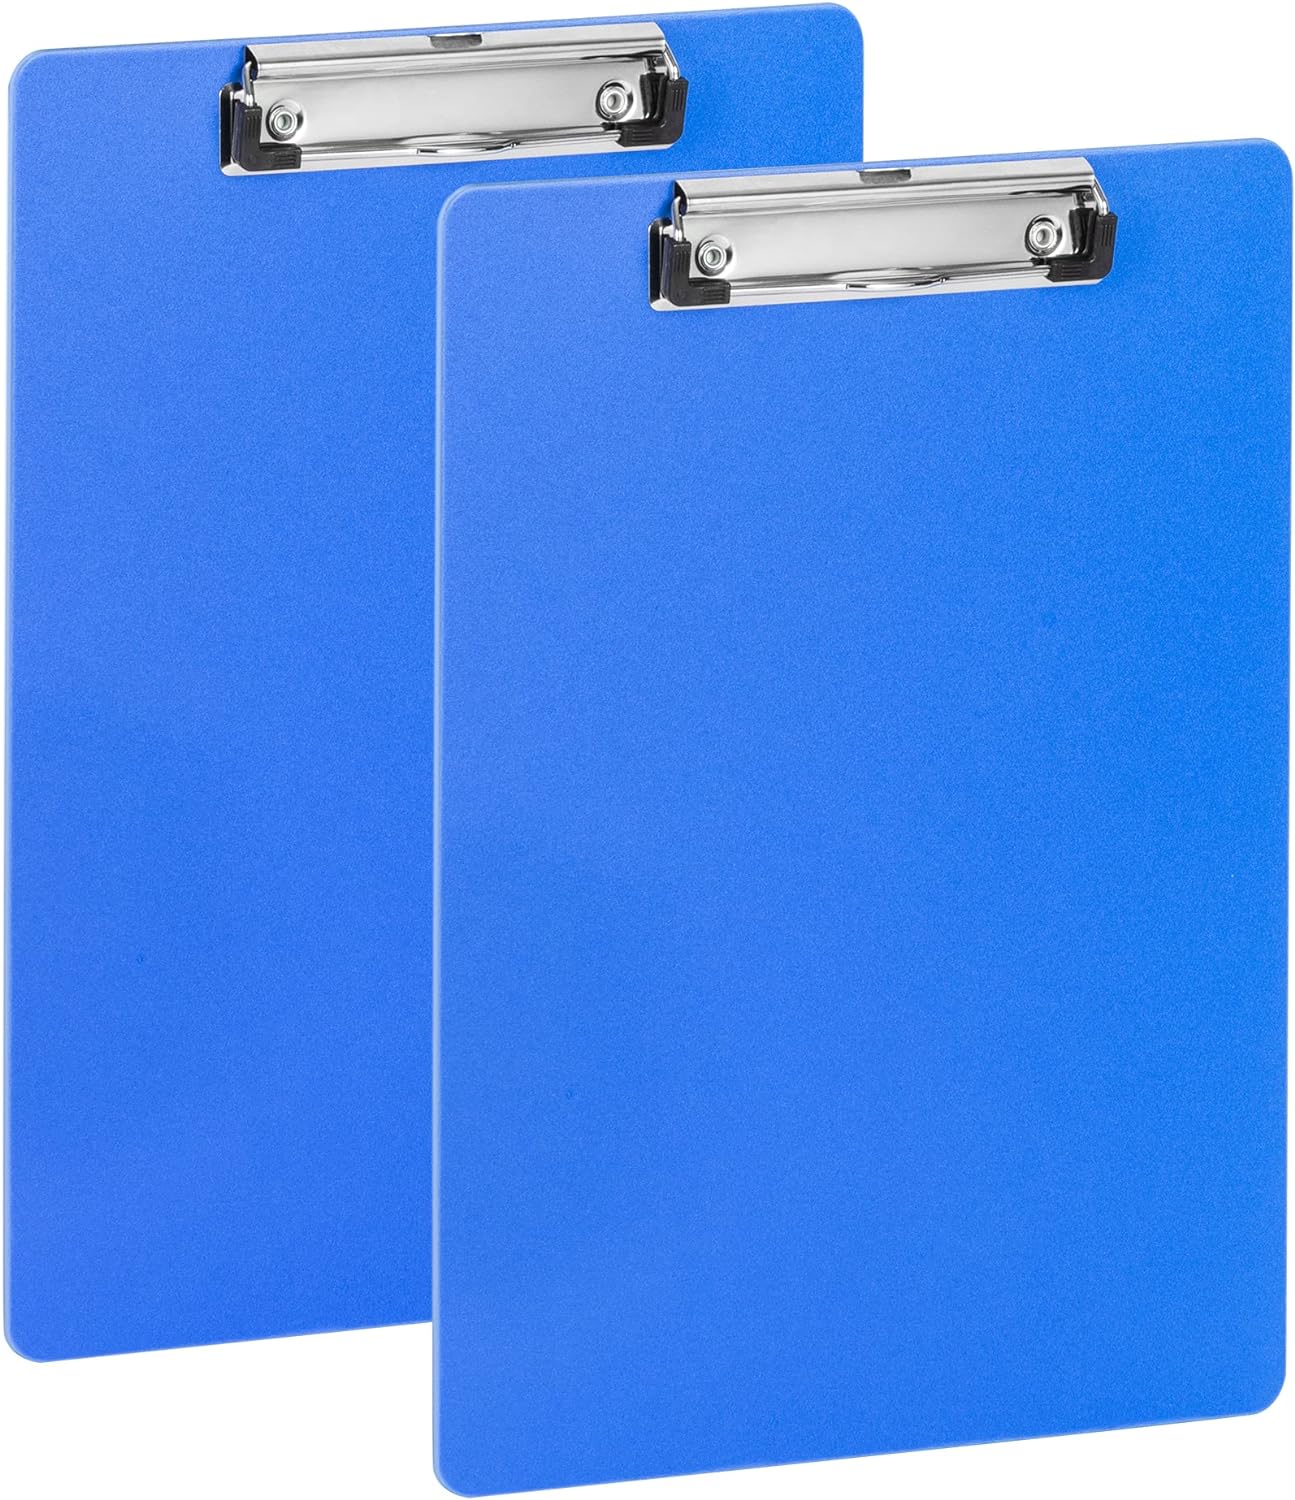 Deli Plastic Clipboard, Clip Board with Low Profile Clip, Standard A4 Letter Size Clipboards for Nurses, Students, Office and Women, Blue, 2 Pack